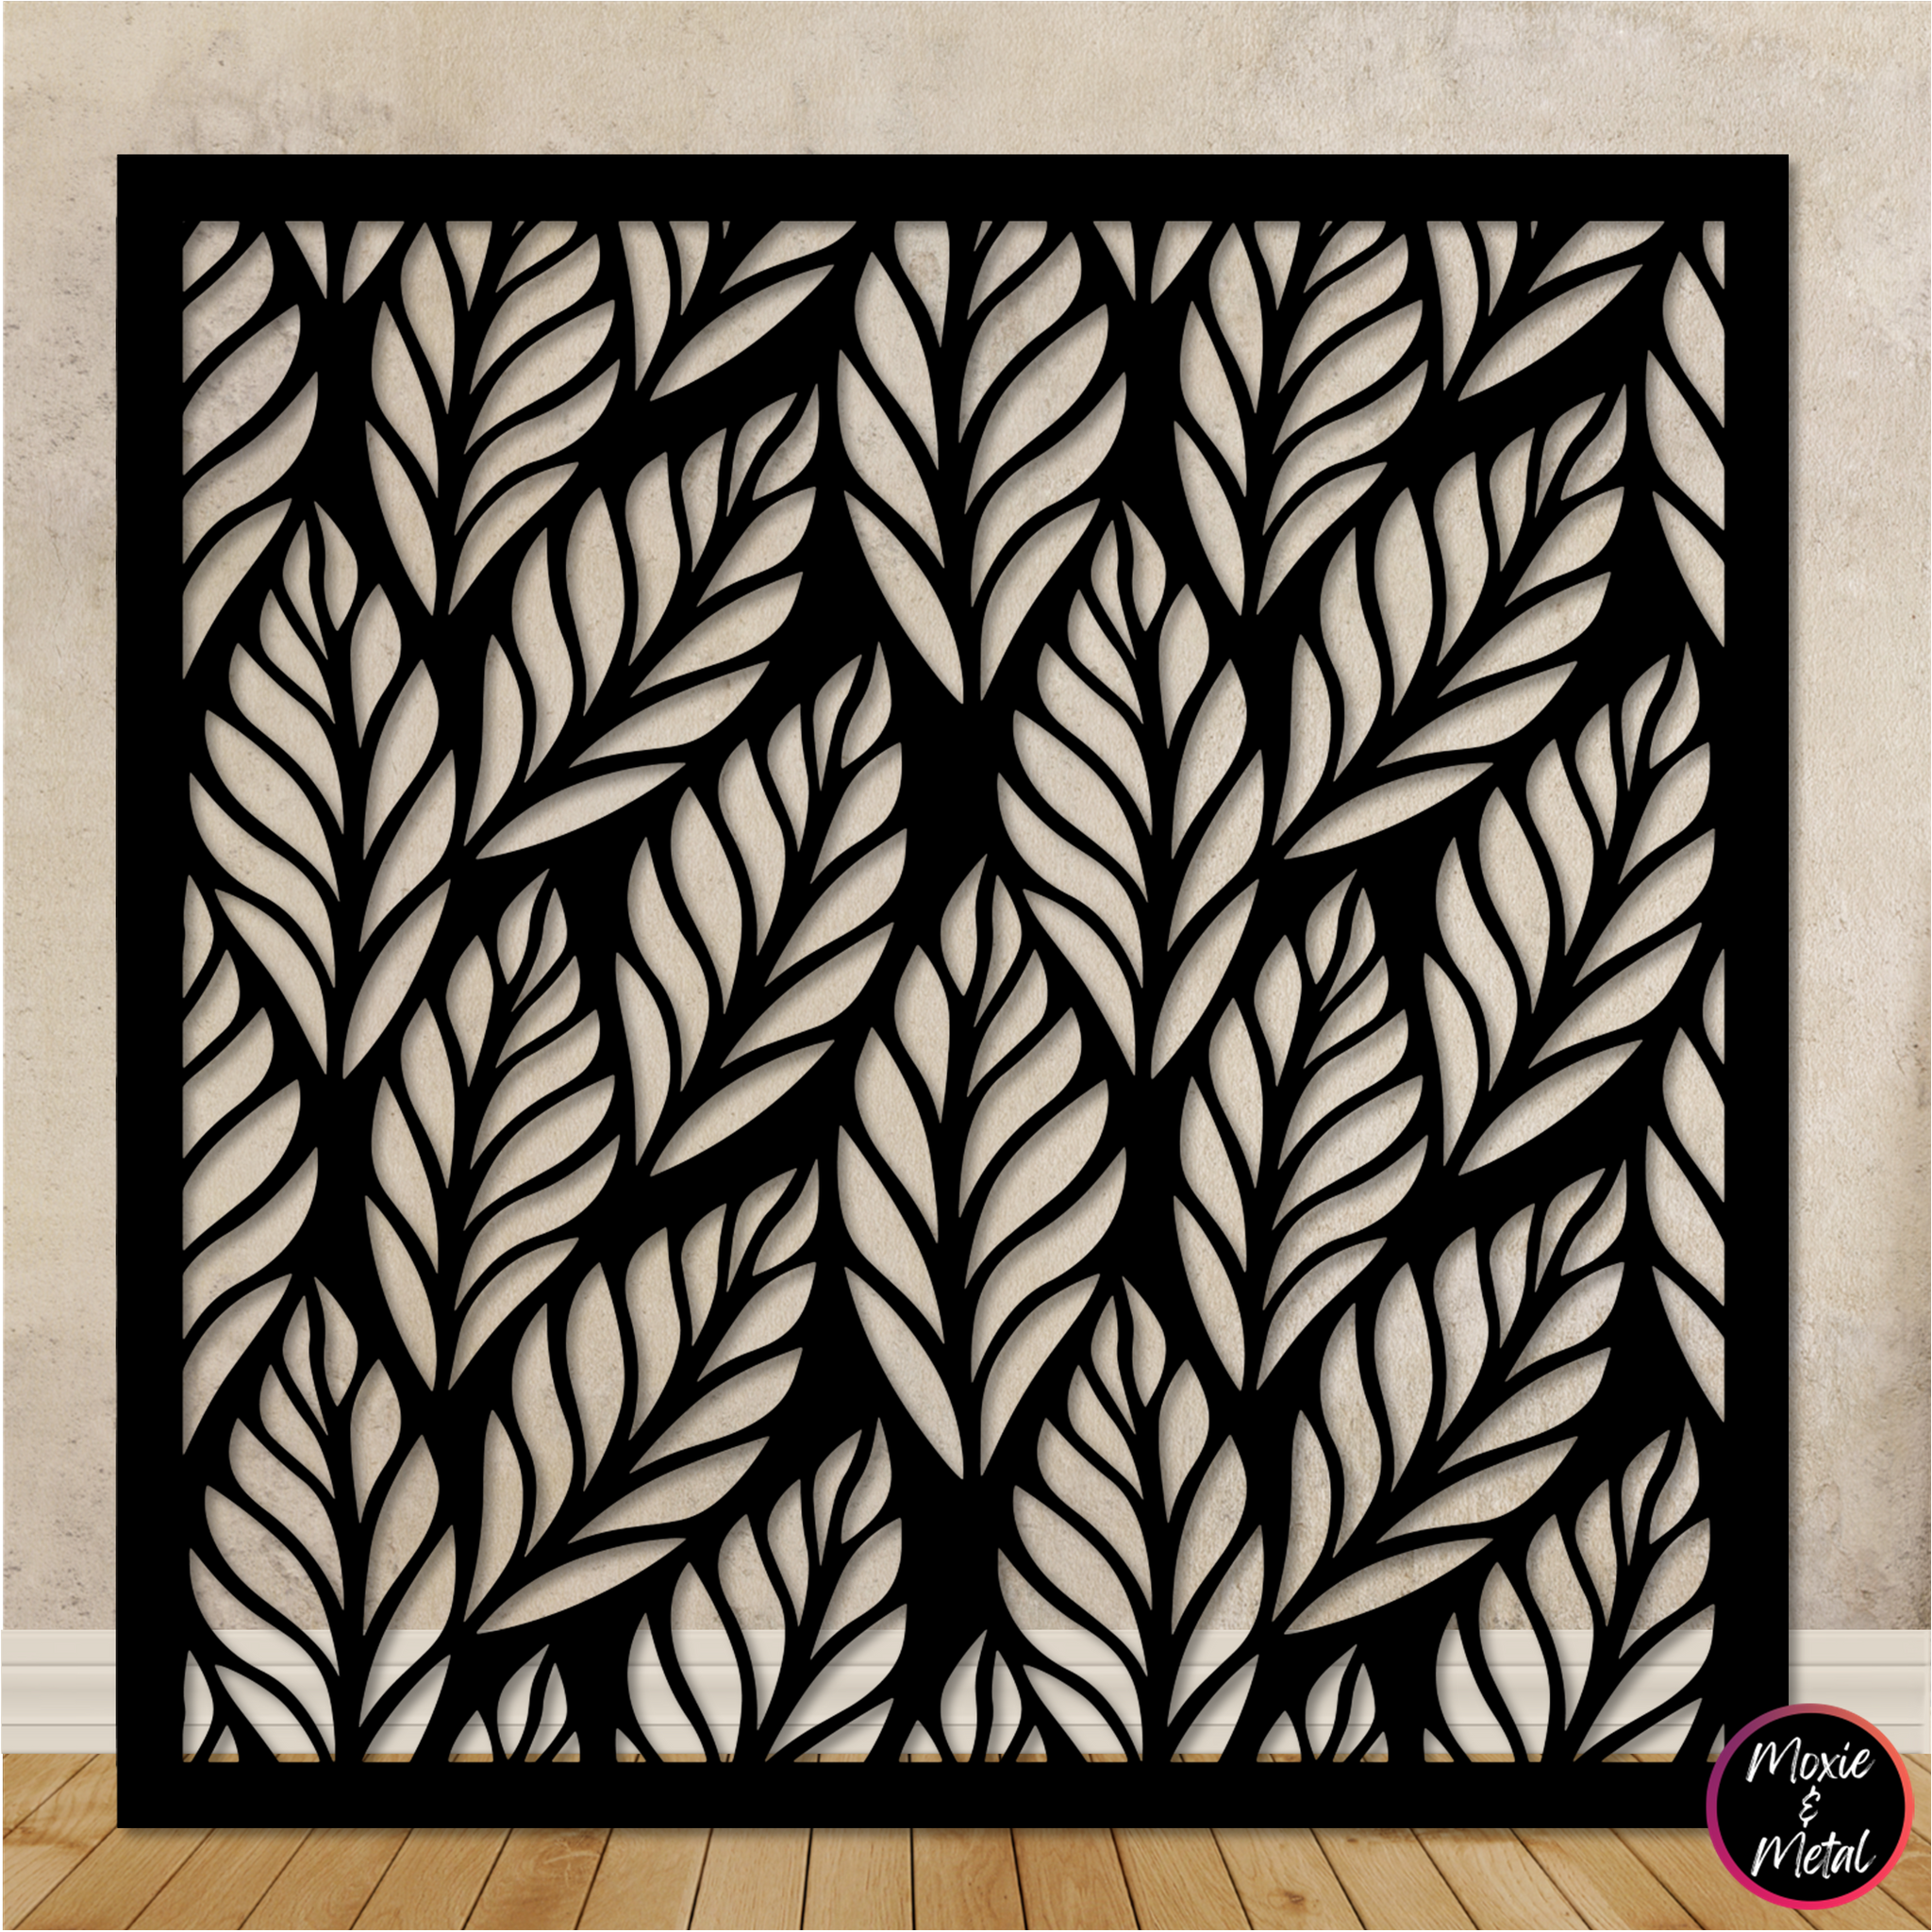 Decorative Metal Screen Panel Perfect For Outdoor & Indoor Use | Be Metal Be